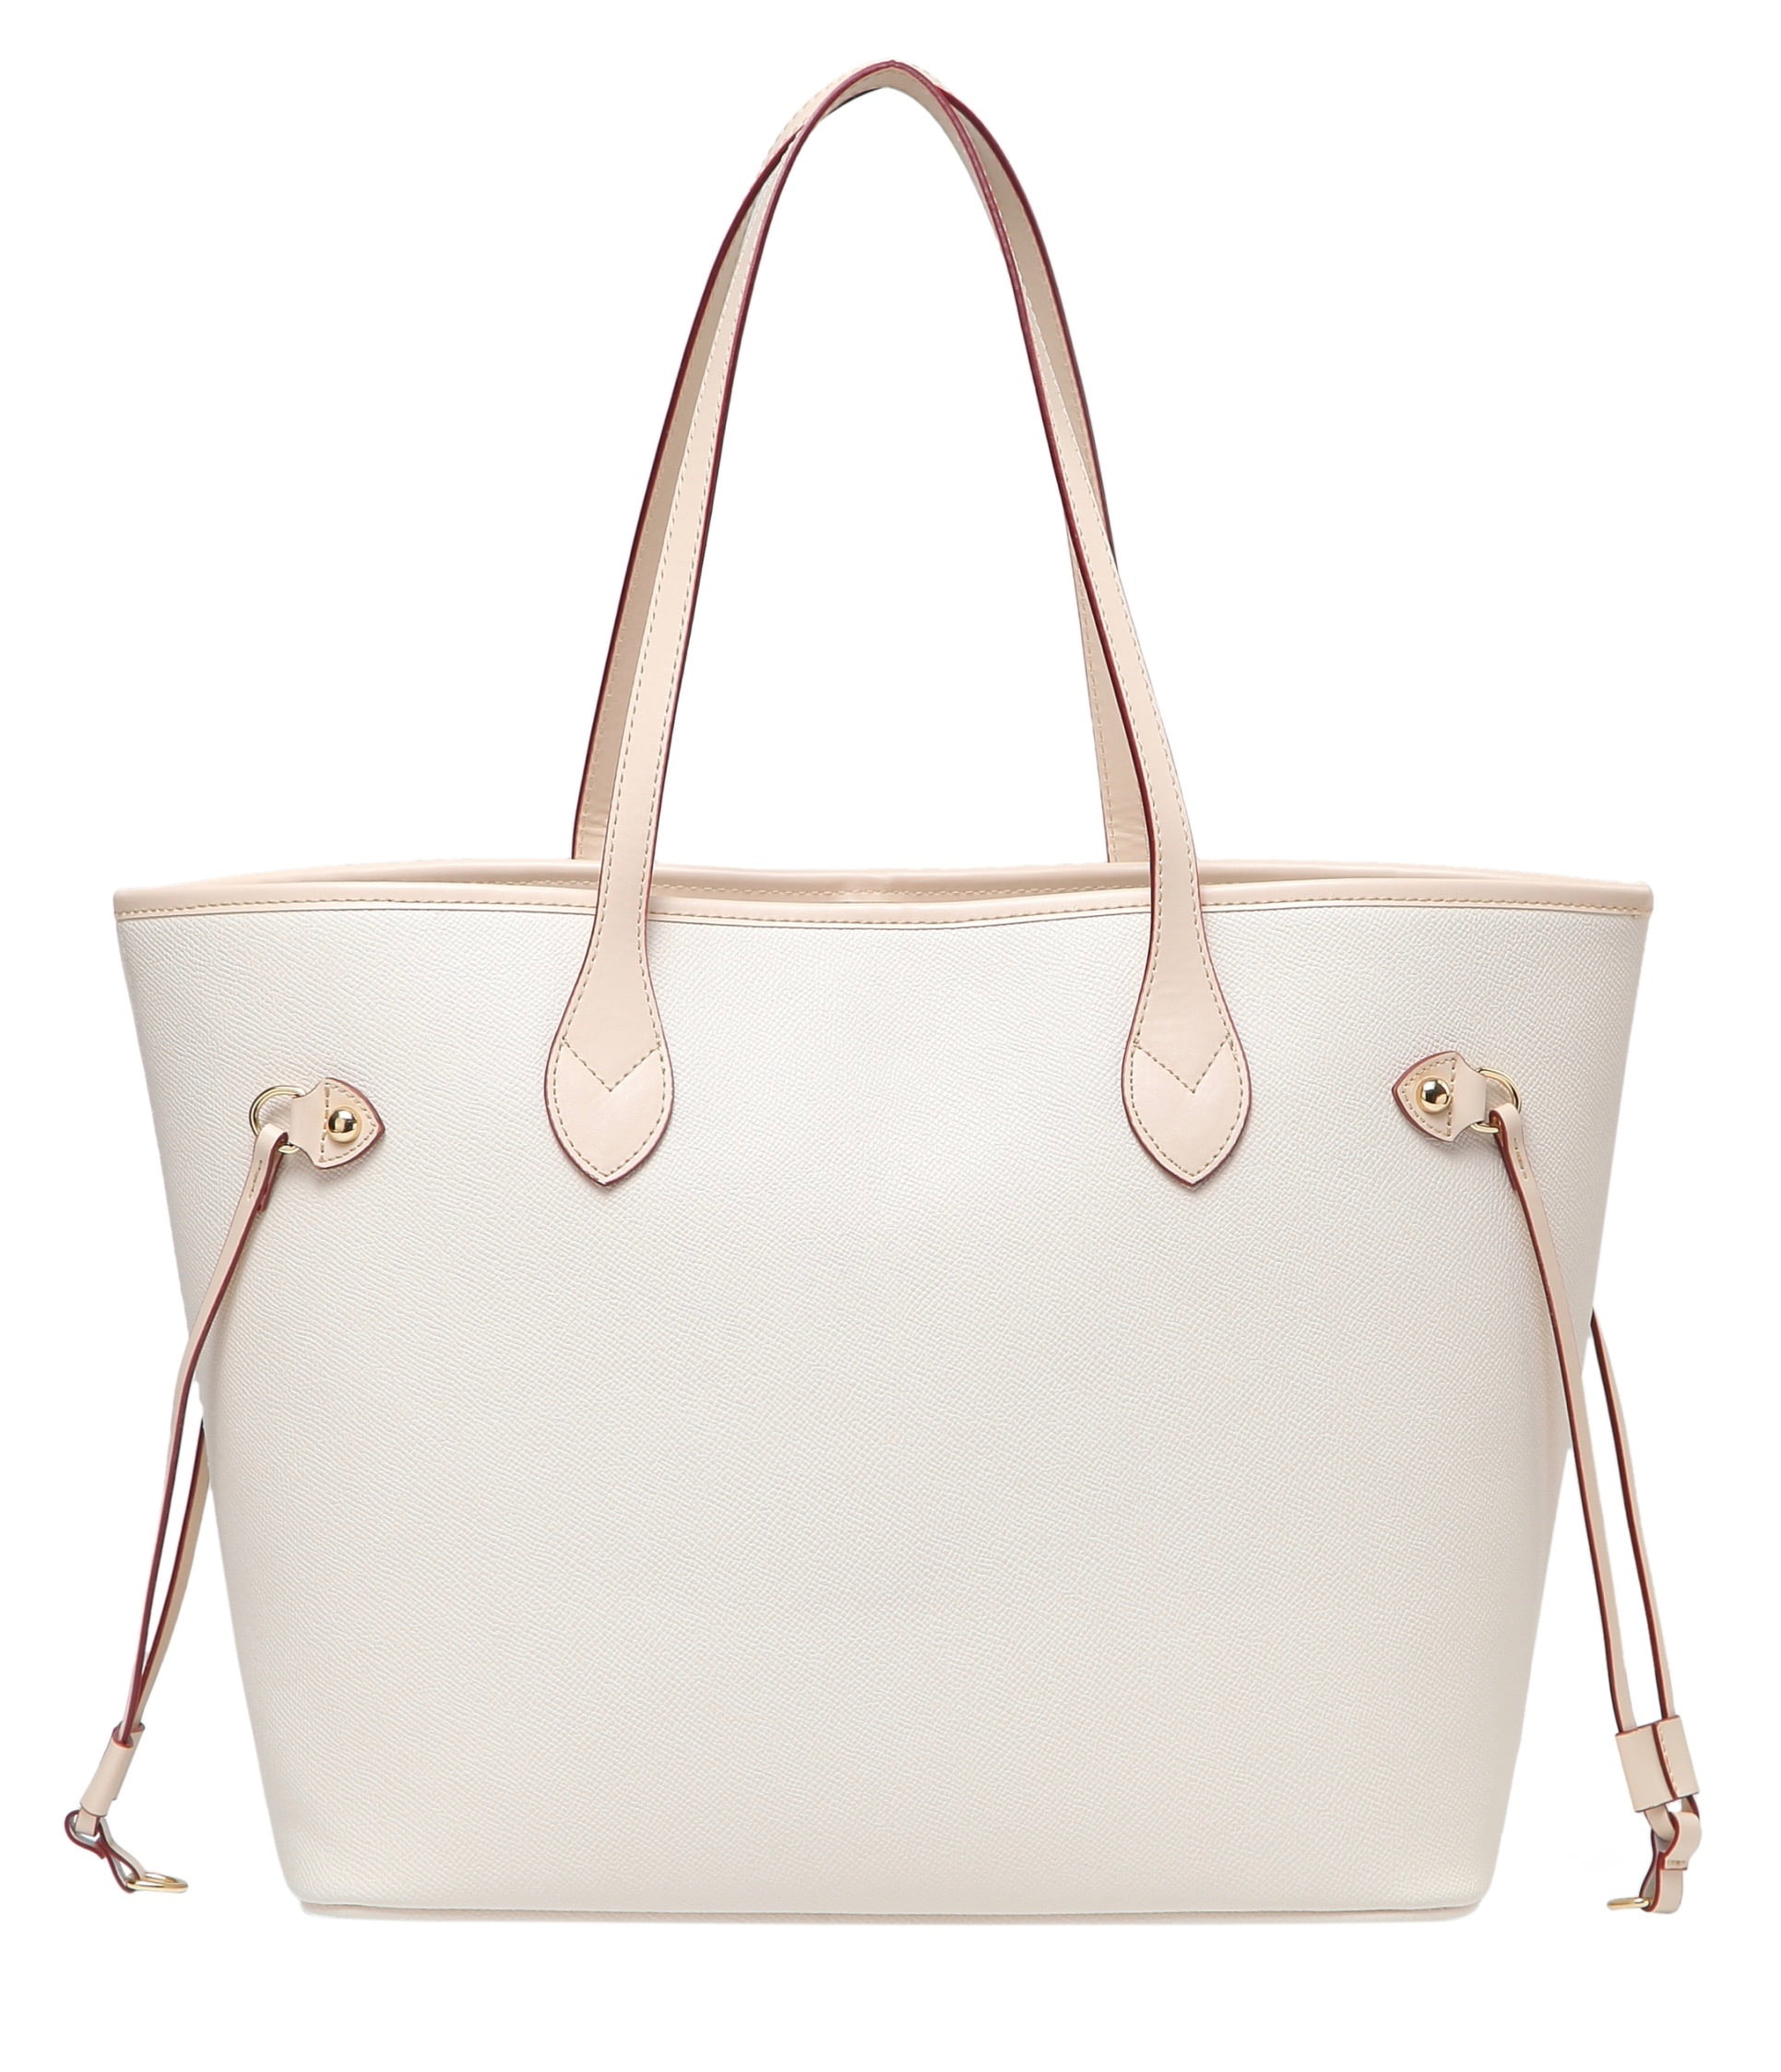 Tote Bags – Daisy Rose bags